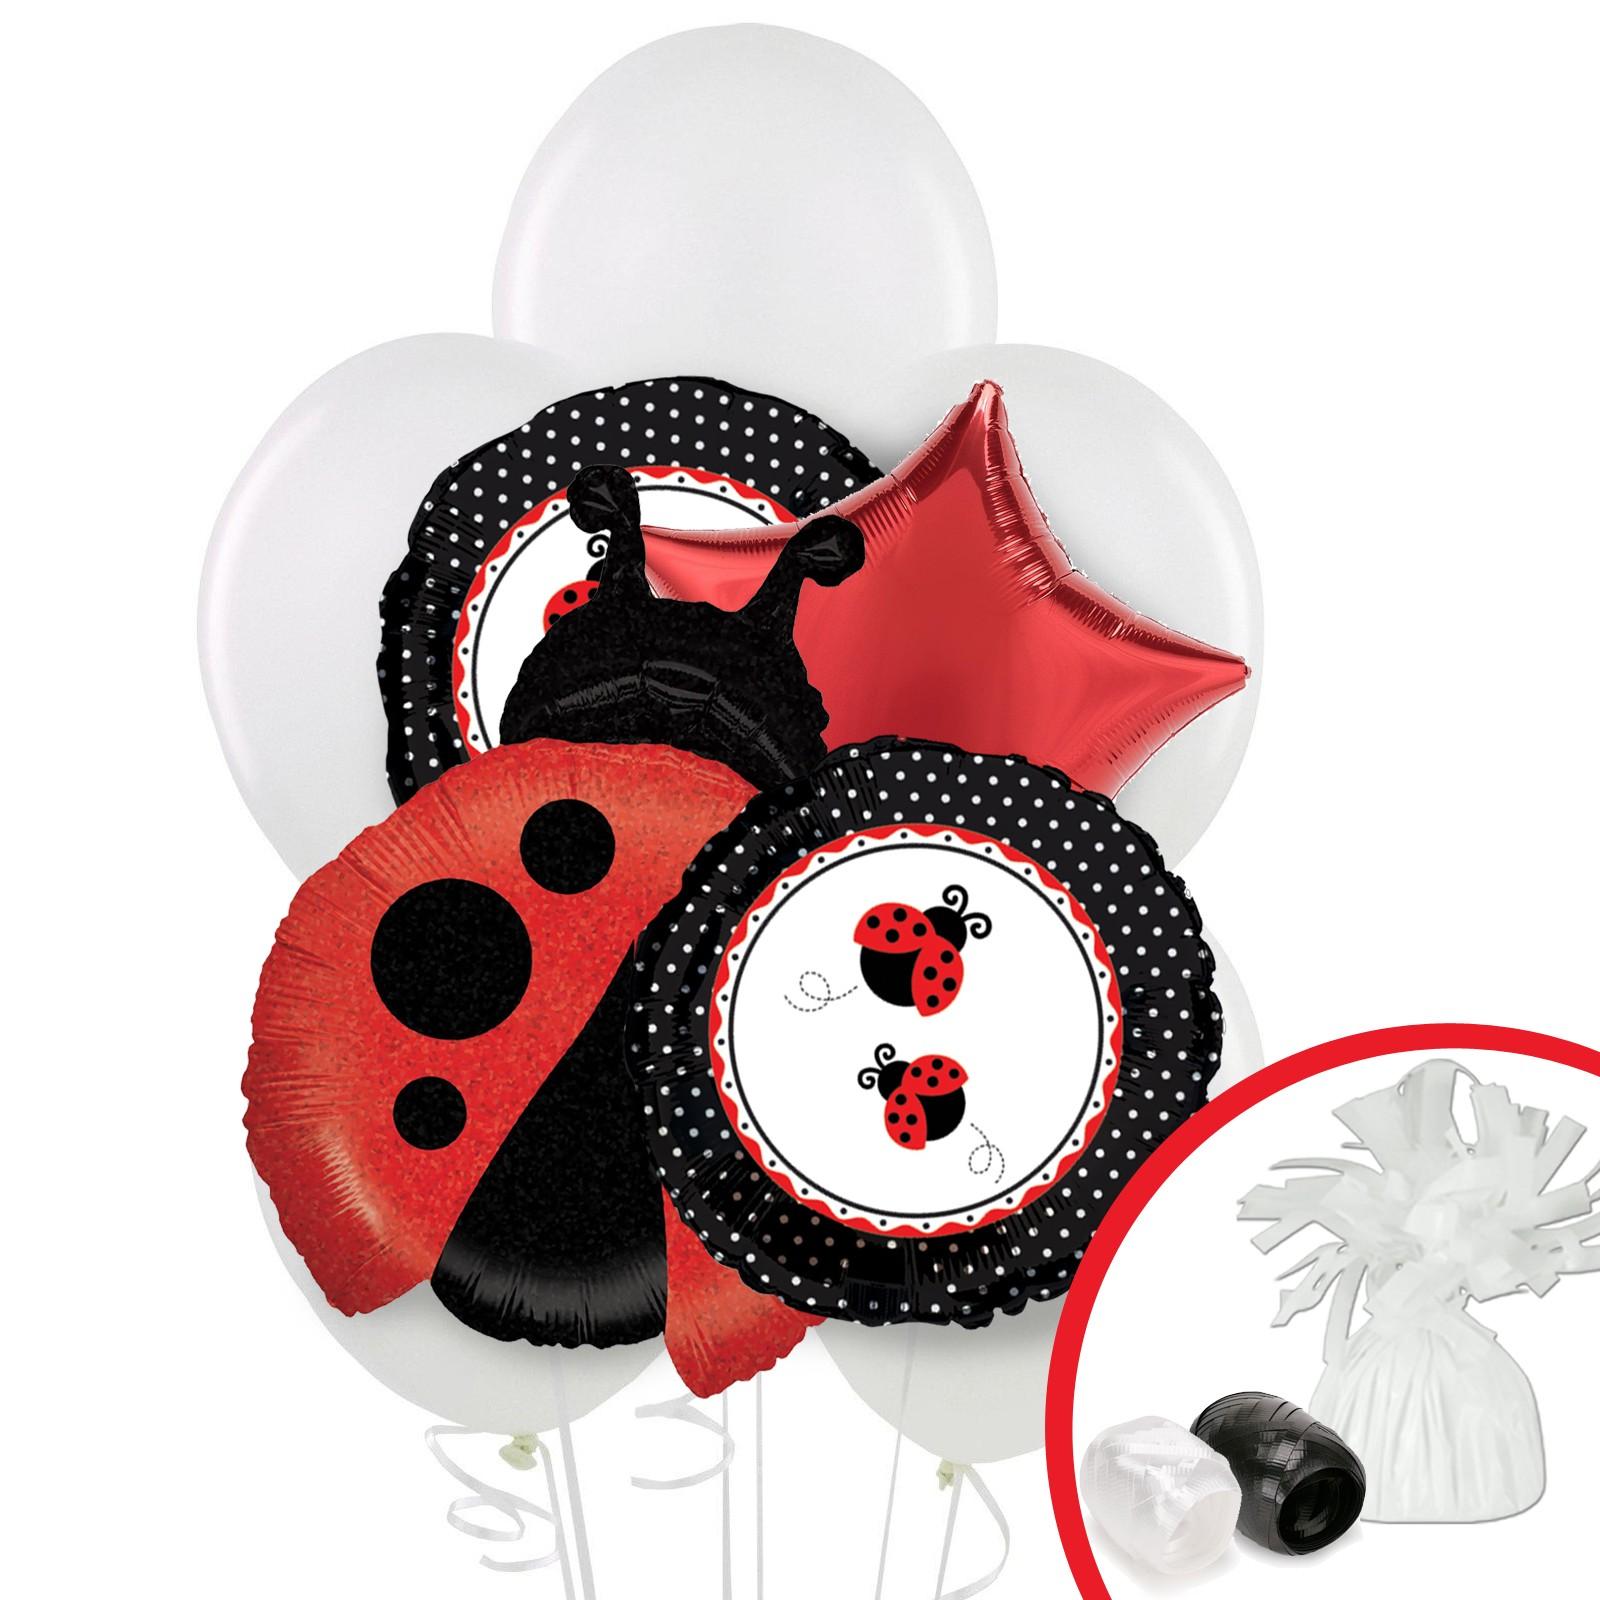 Includes Gift Bag Balloons Table Cloth Plates Cupcake and Banner 106 PCS Ladybug Birthday Party Supplies Decorations Favors Set